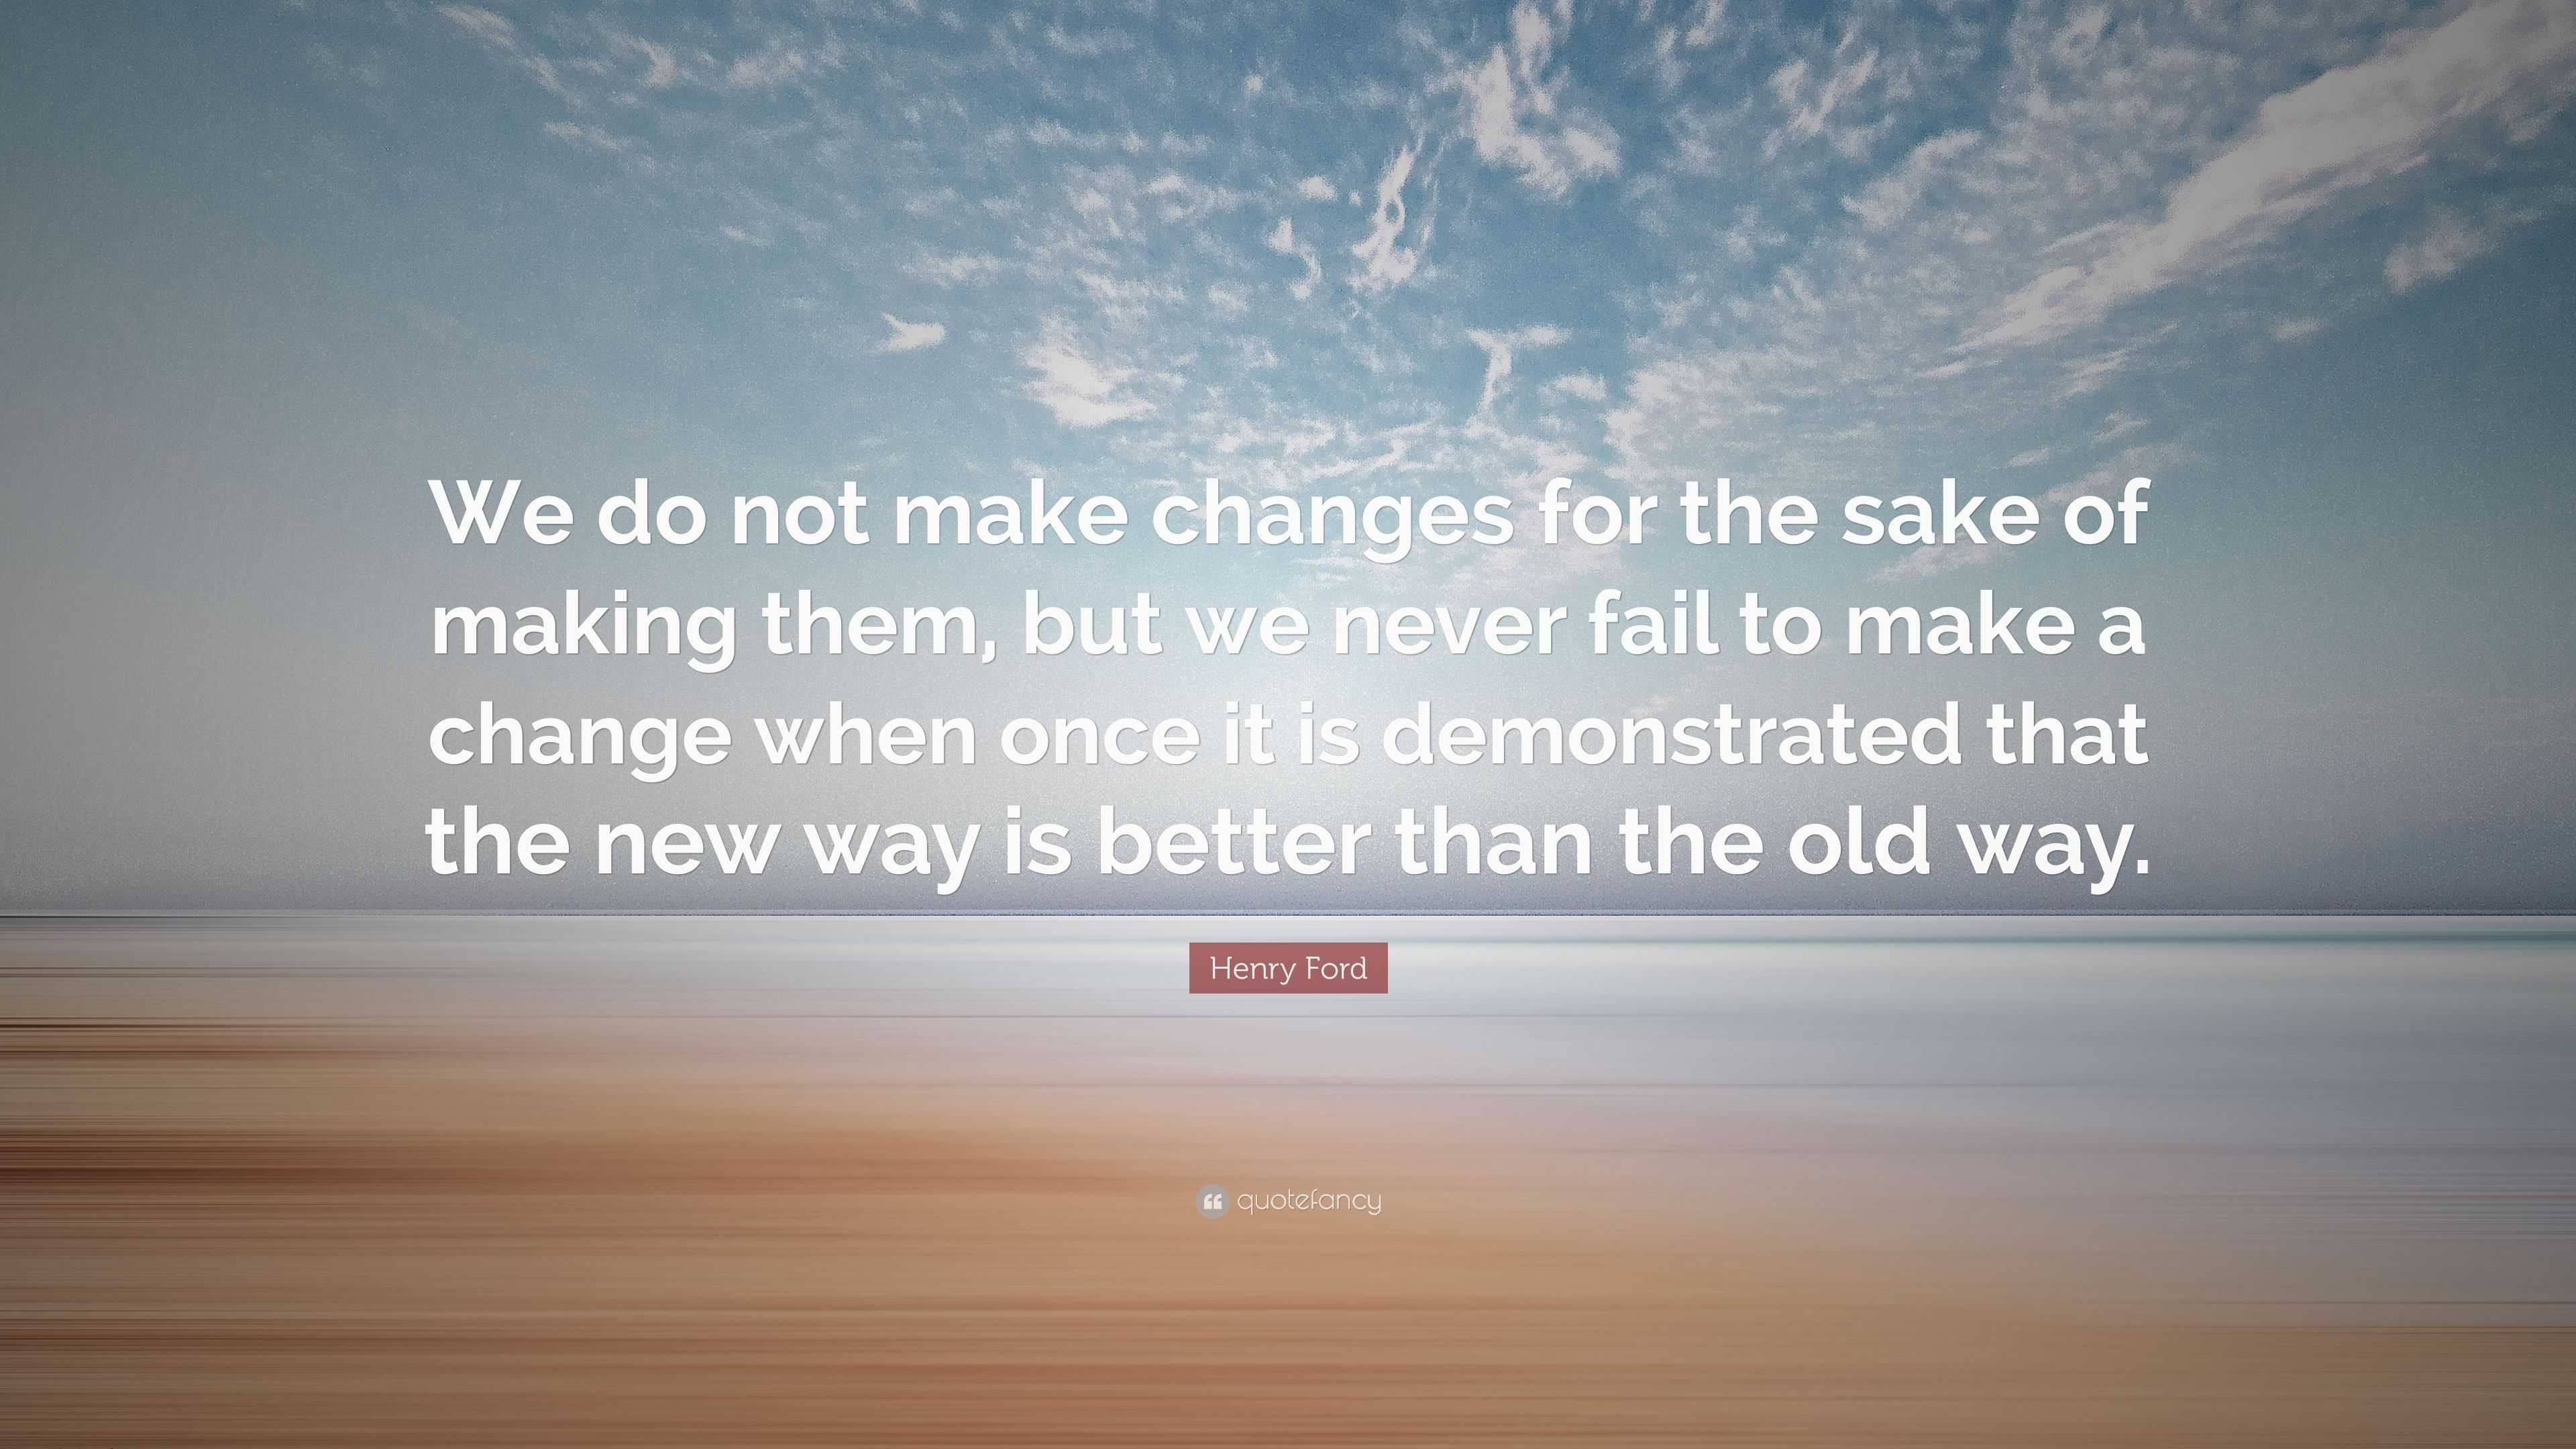 Henry Ford Quote: “We do not make changes for the sake of making them ...